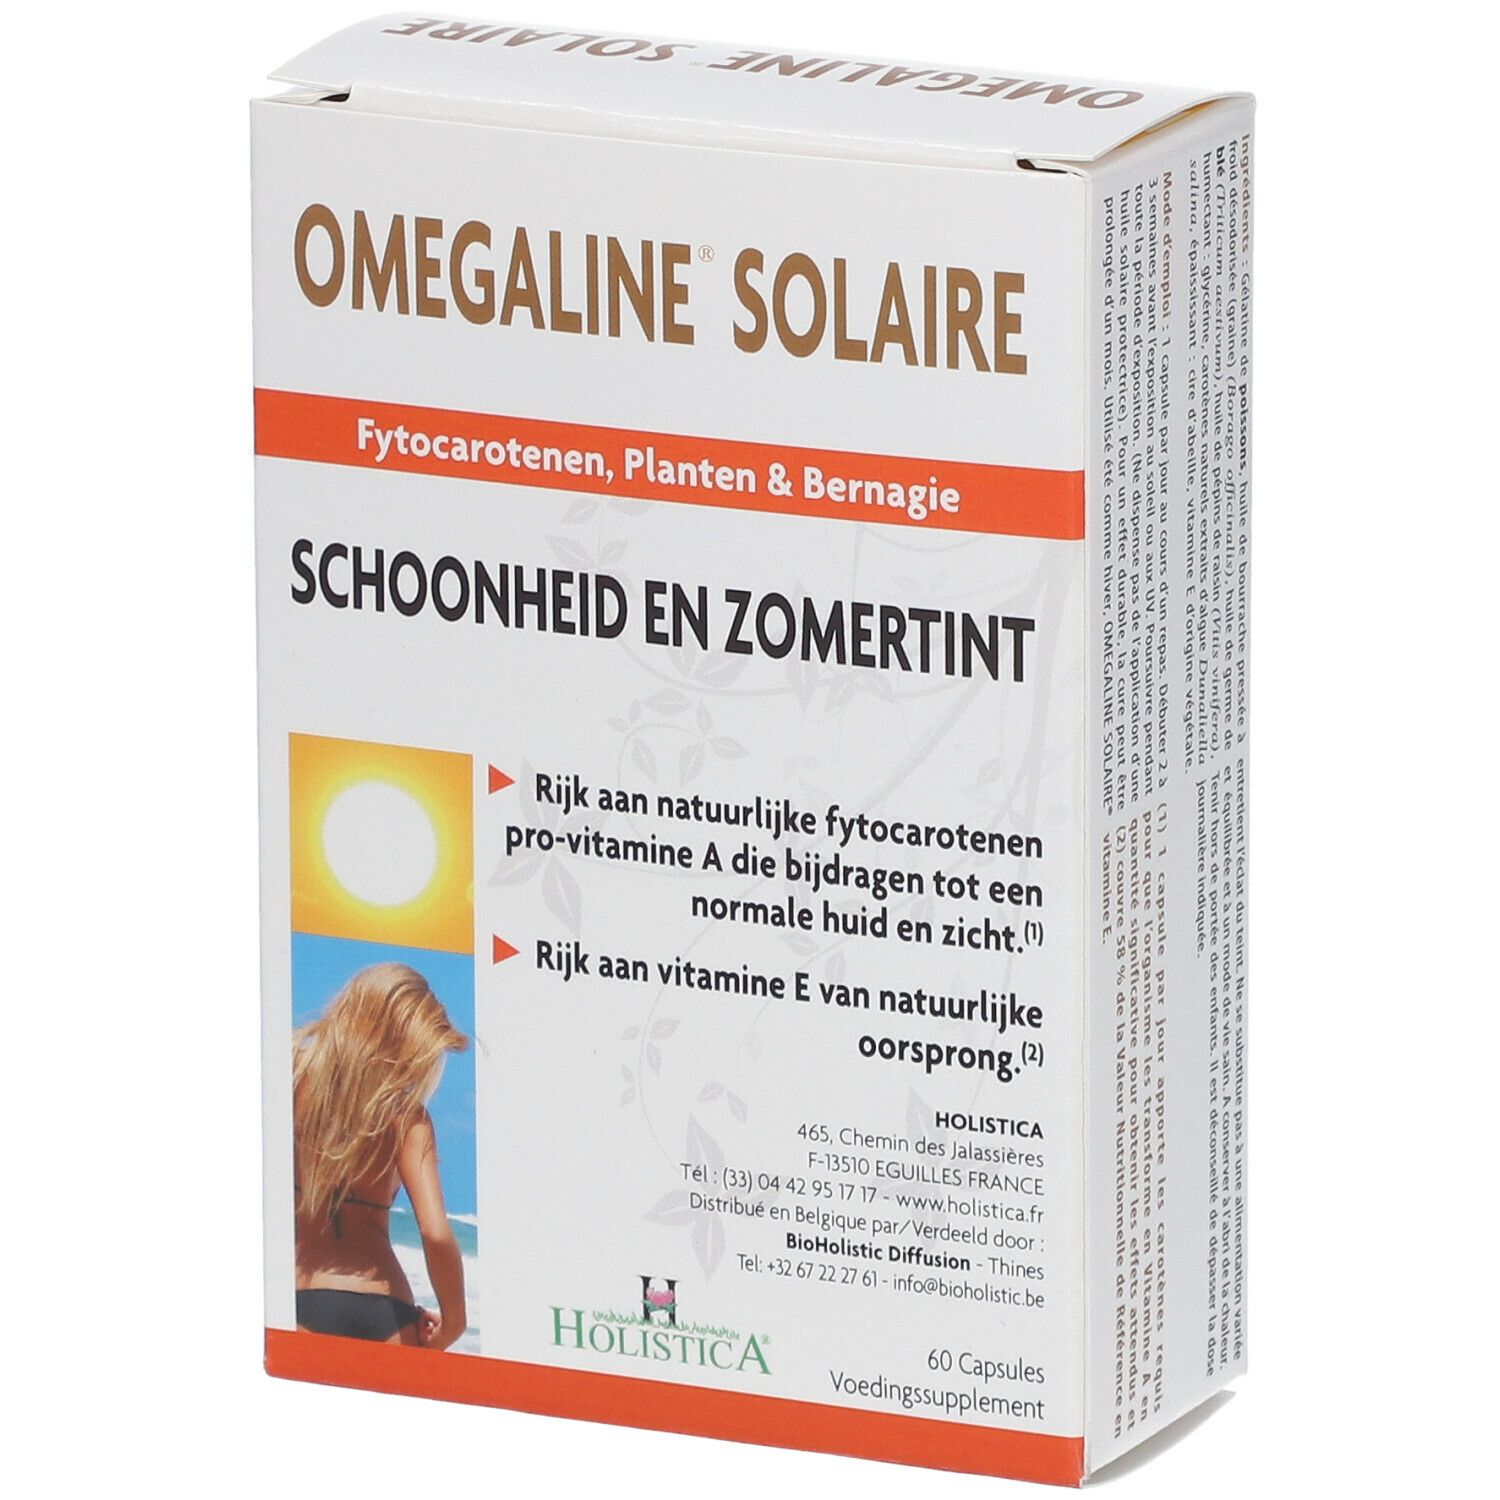 OMEGALINE® SOLAIRE Beauty & Sommerlicher Teint